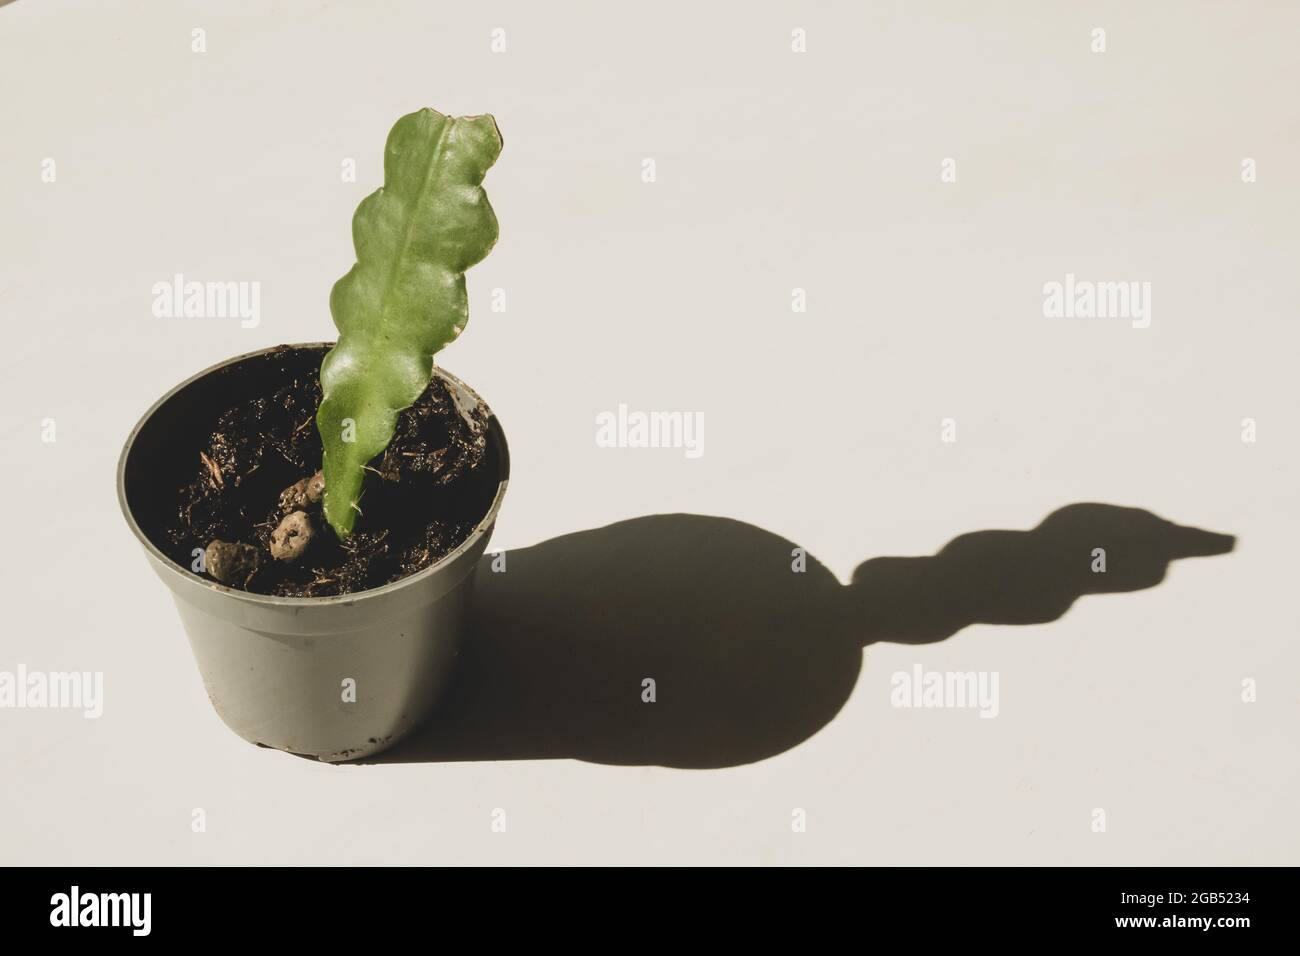 An angled view of a young, recently propagated Fishbone or zig zag Cactus casting a clean, rounded shadow against a plain white background Stock Photo